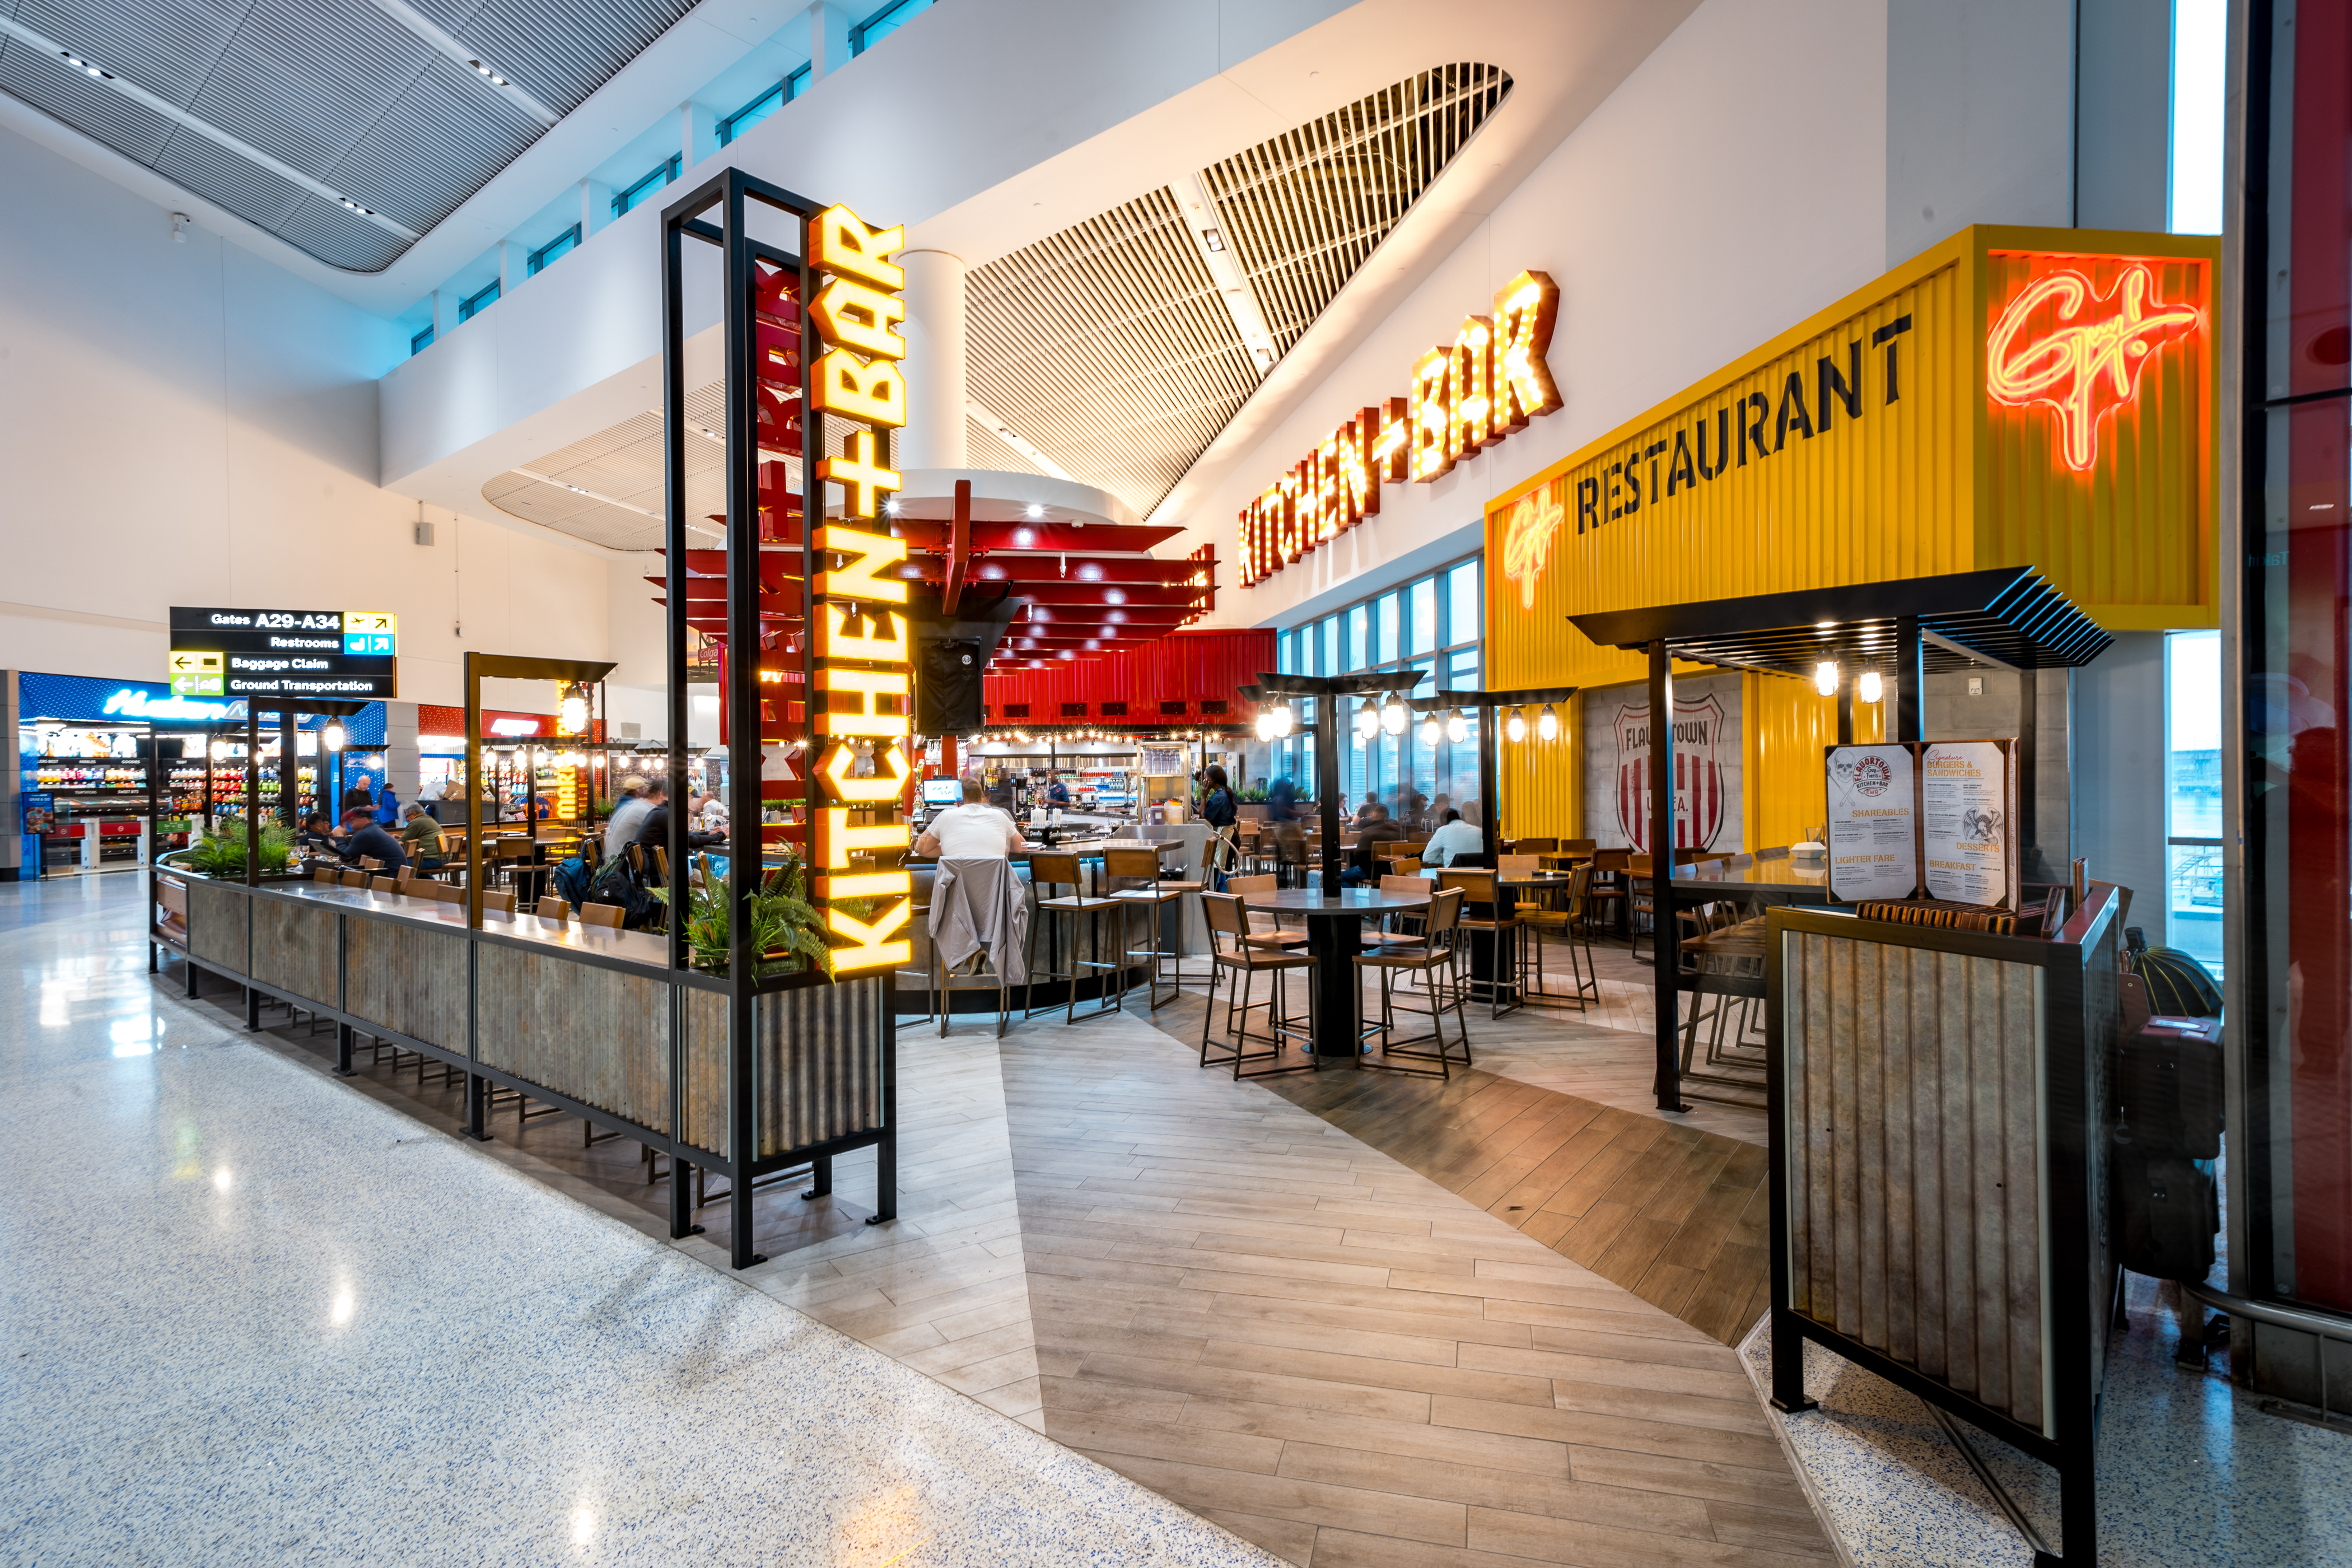 NEWARK LIBERTY INTERNATIONAL AIRPORT’S NEW TERMINAL A ADDS TO DIVERSE DINING OPTIONS WITH INTRODUCTION OF GUY FIERI’S FLAVORTOWN KITCHEN + BAR